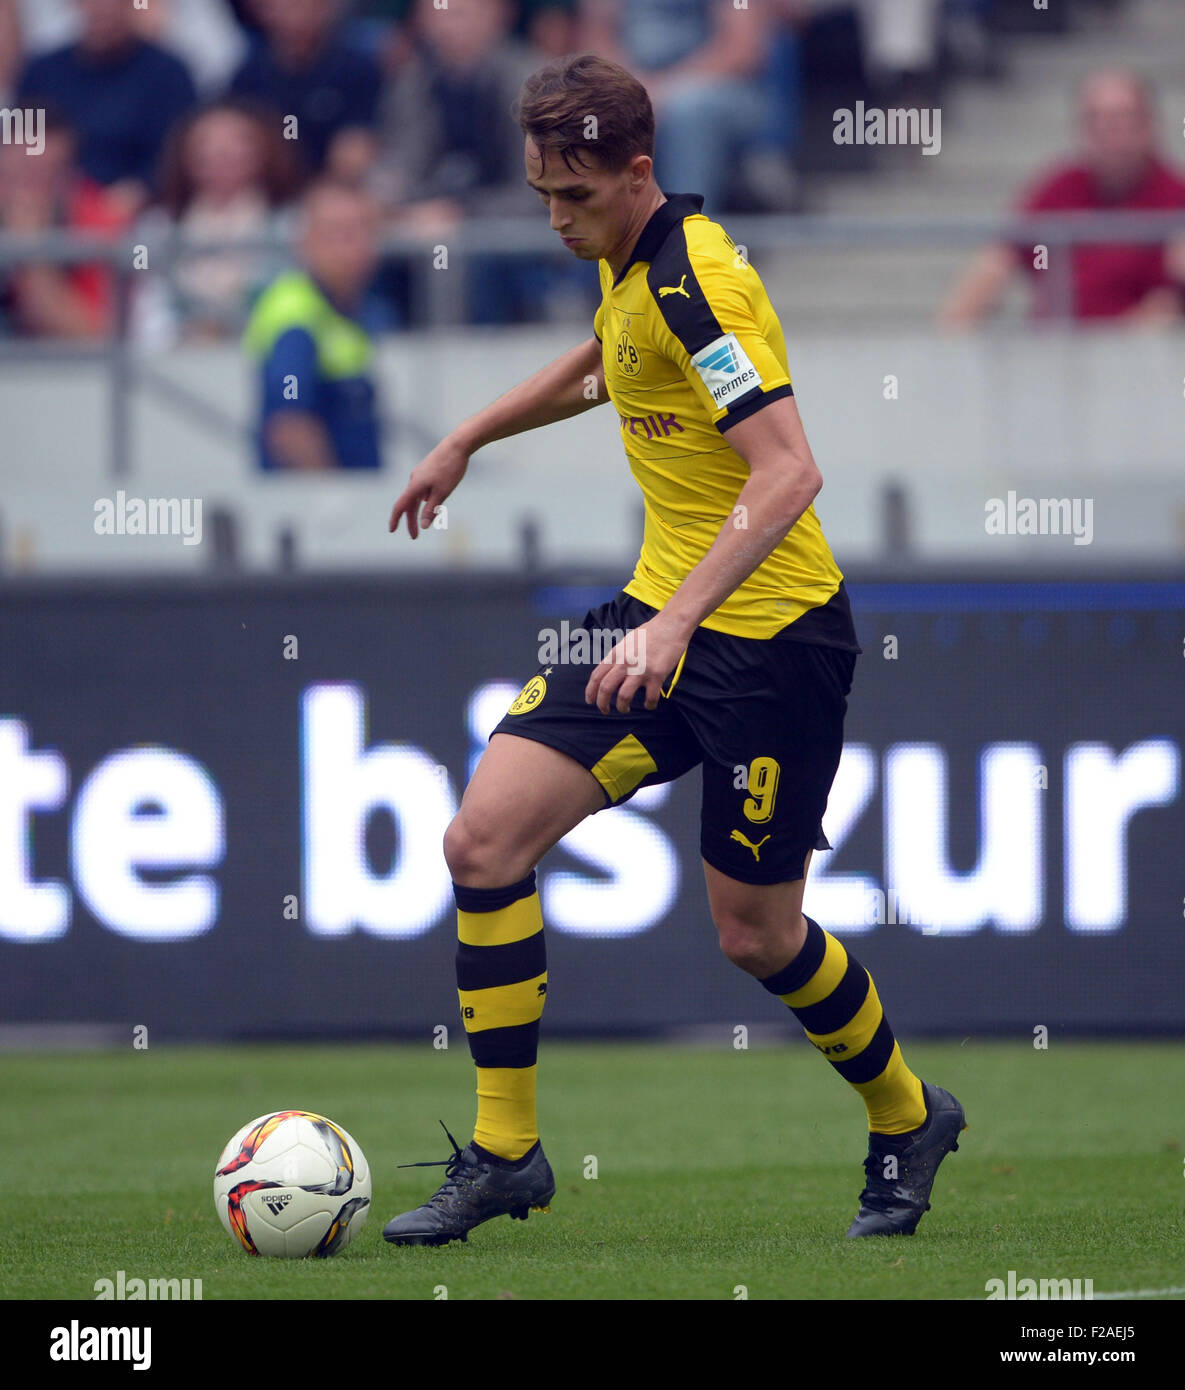 Dortmund's Adnan Januzaj in action during a German Bundesliga soccer match between Hannover 96 and Borussia Dortmund at HDI-Arena in Hanover, Germany, 12 September 2015. Photo: Peter Steffen/dpa Stock Photo